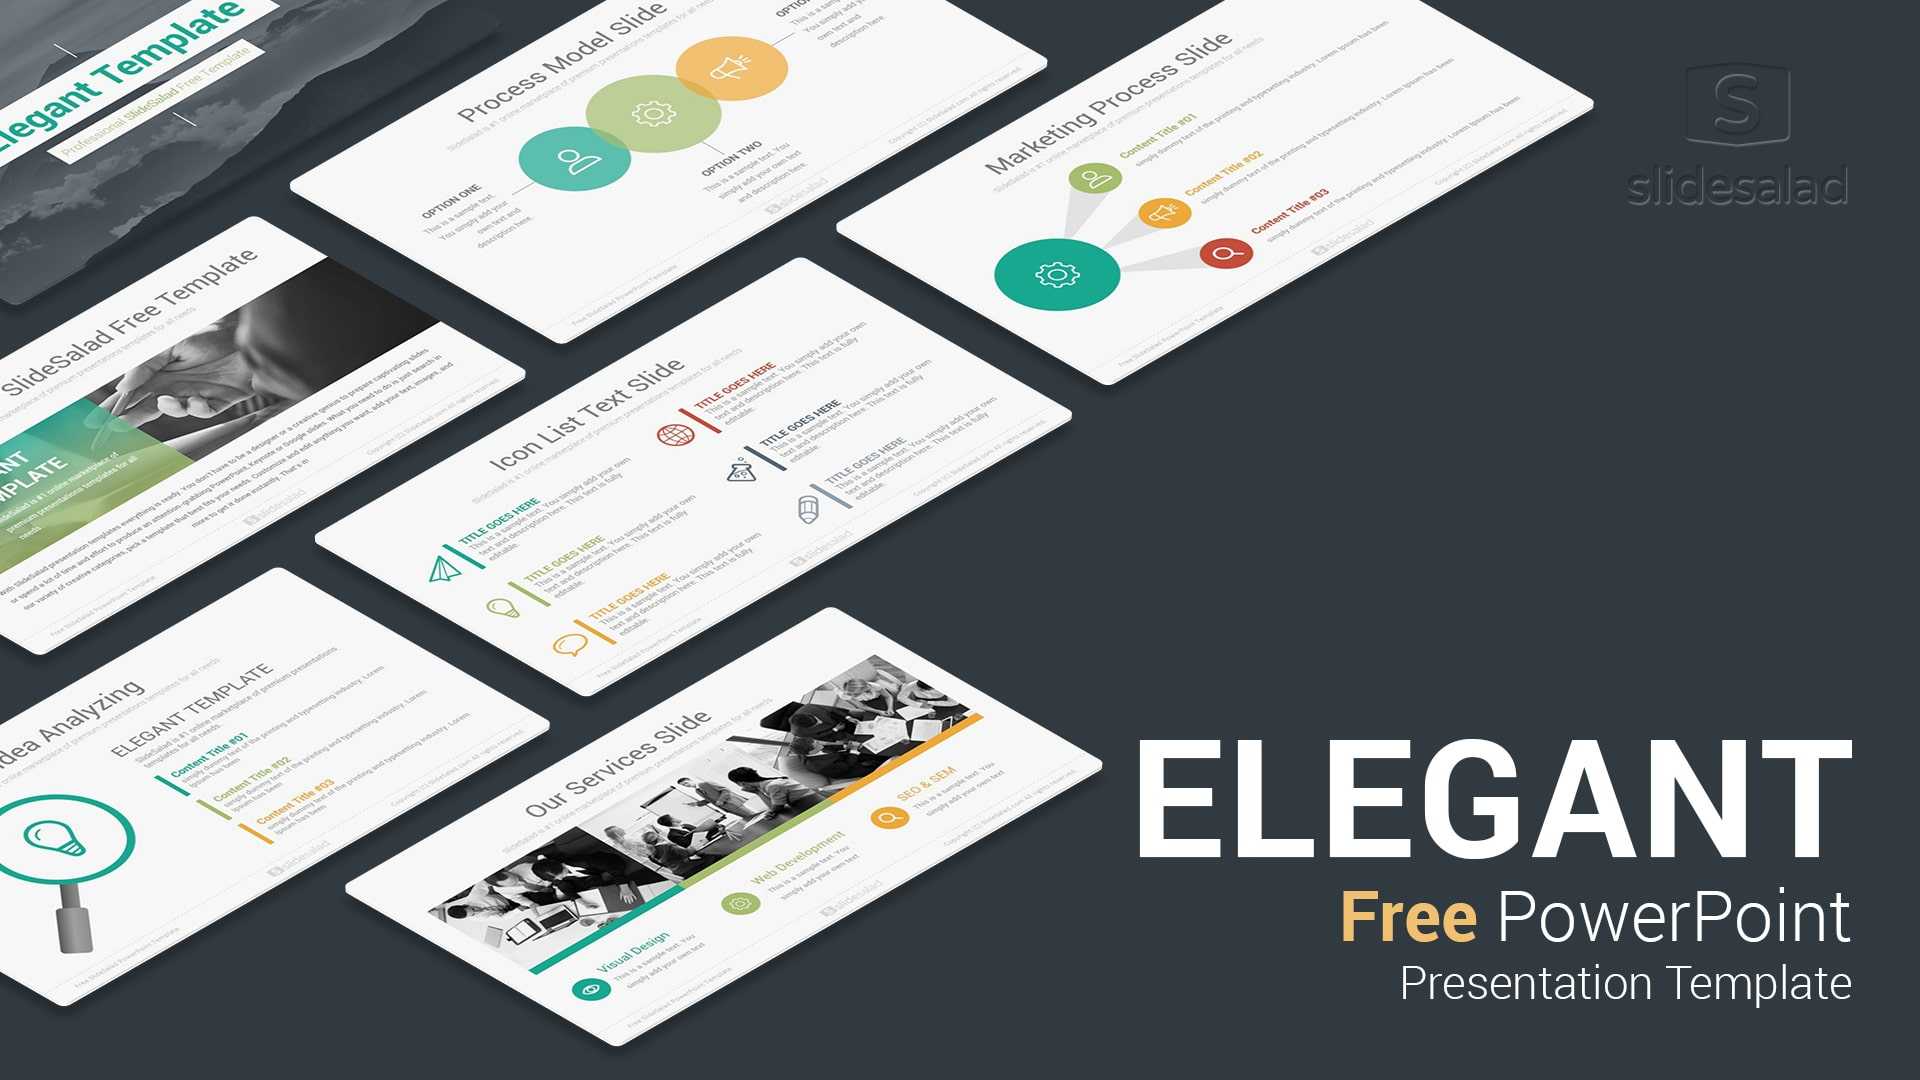 Elegant Free Download Powerpoint Templates For Presentation For Powerpoint Slides Design Templates For Free